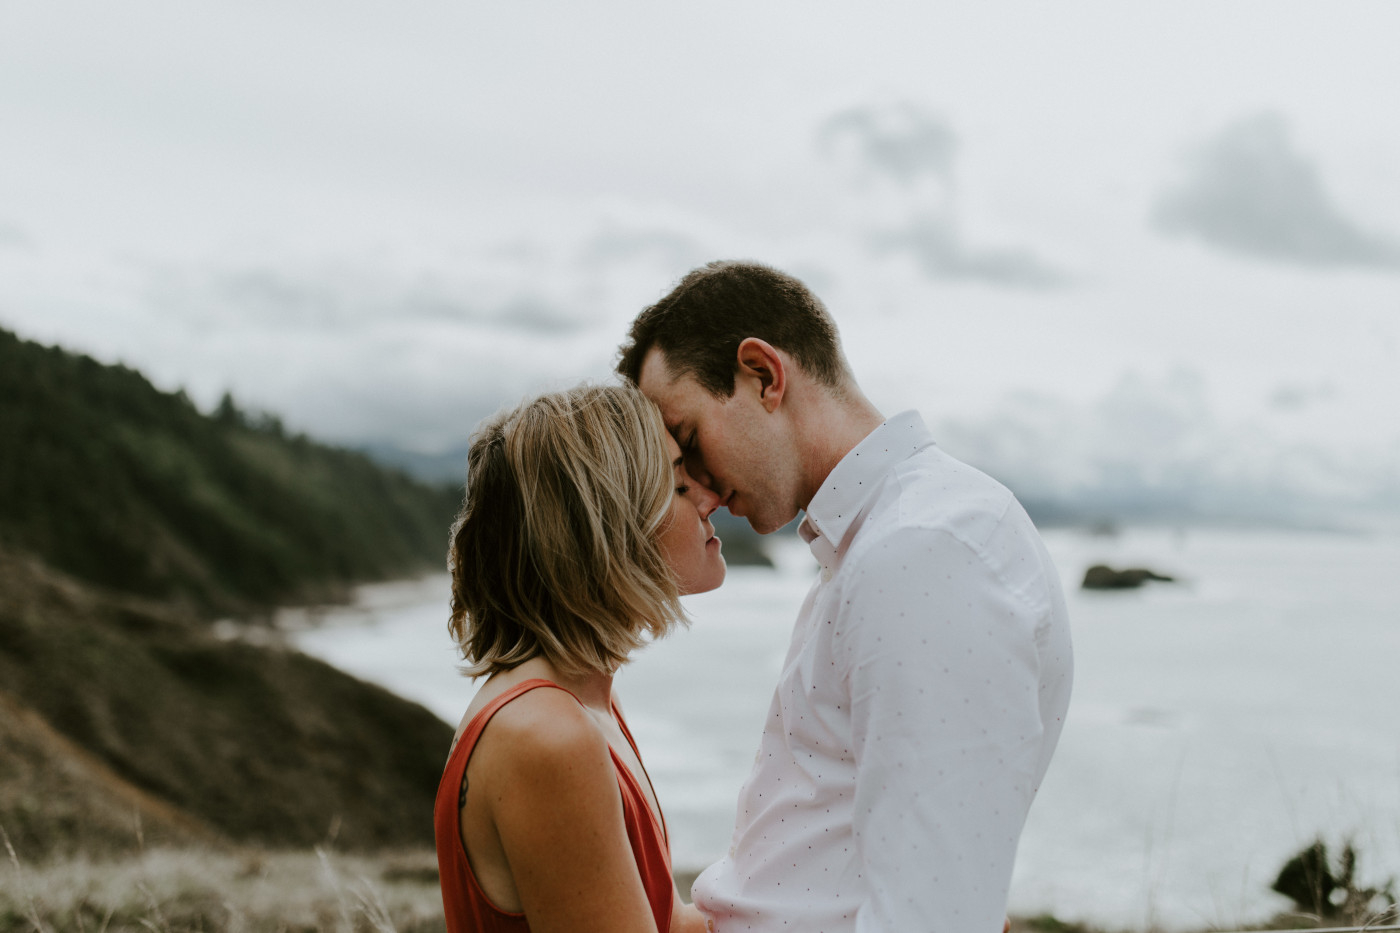 Chelsey and Billy stand near Cannon Beach. Elopement wedding photography at Cannon Beach by Sienna Plus Josh.